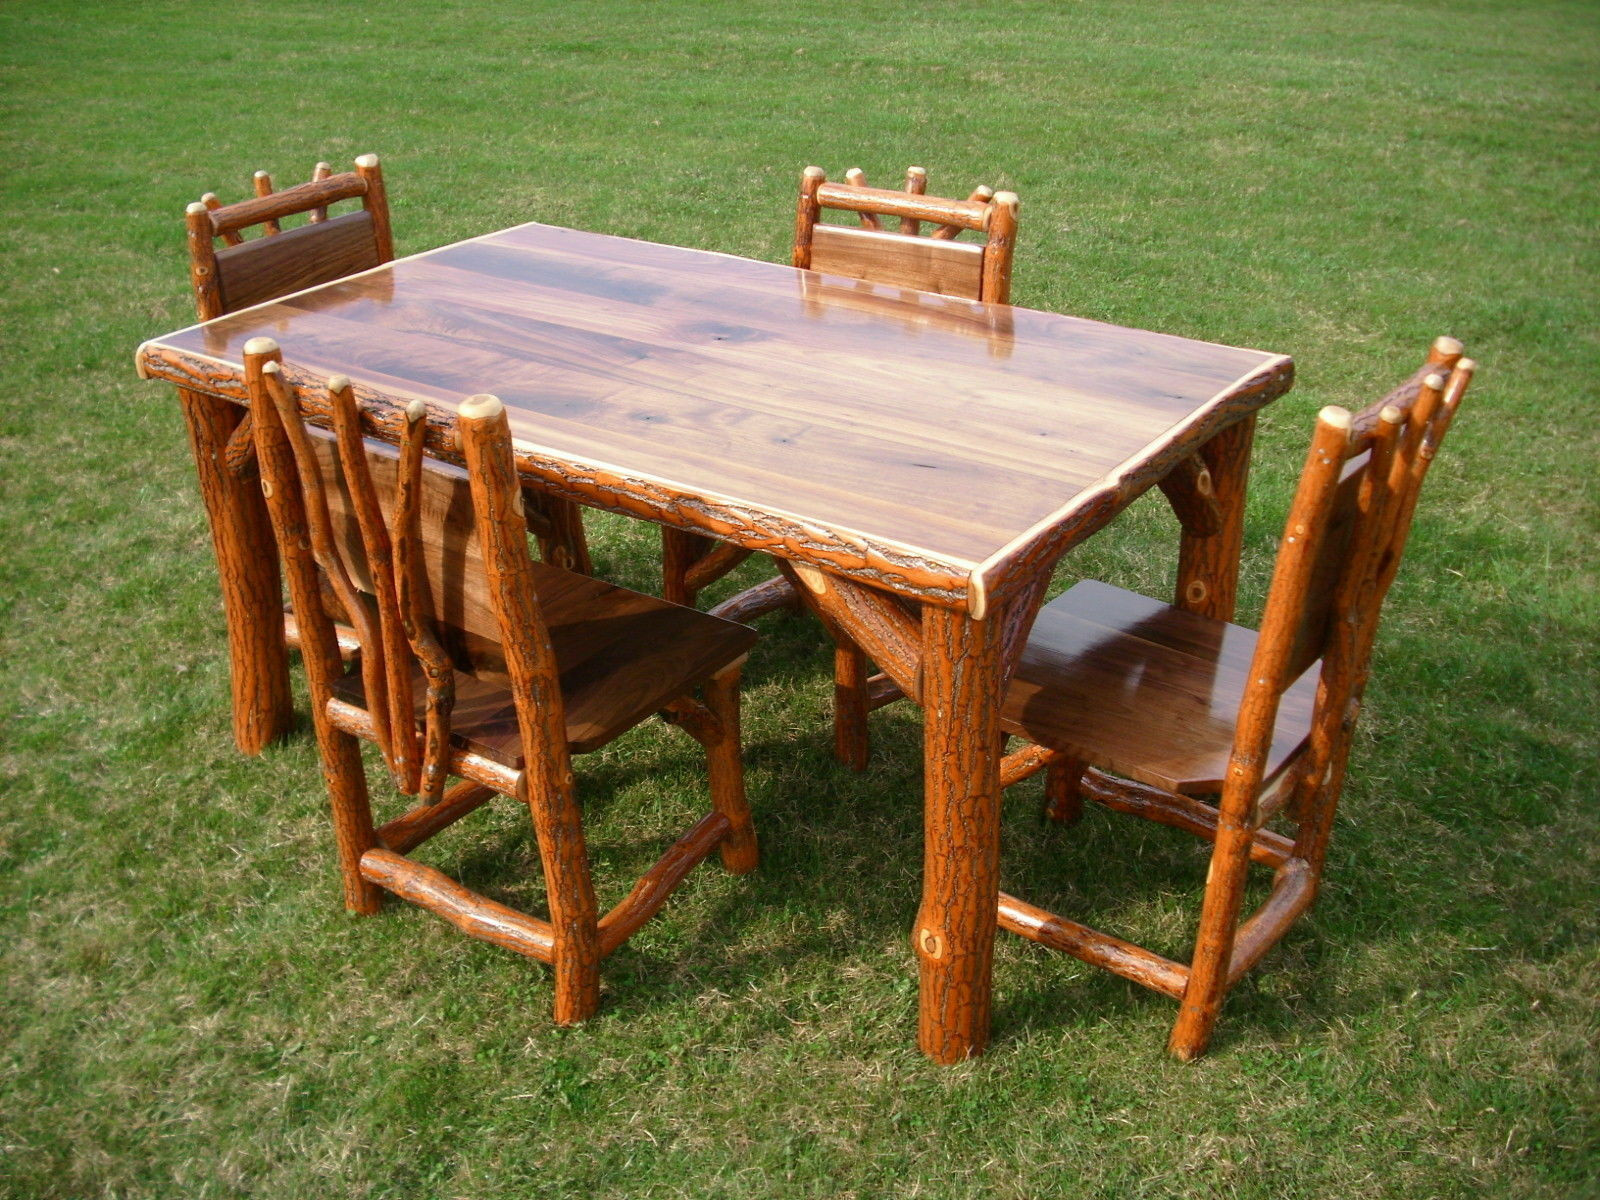 Kitchen Tables Rustic
 How to Build a Rustic Kitchen Table